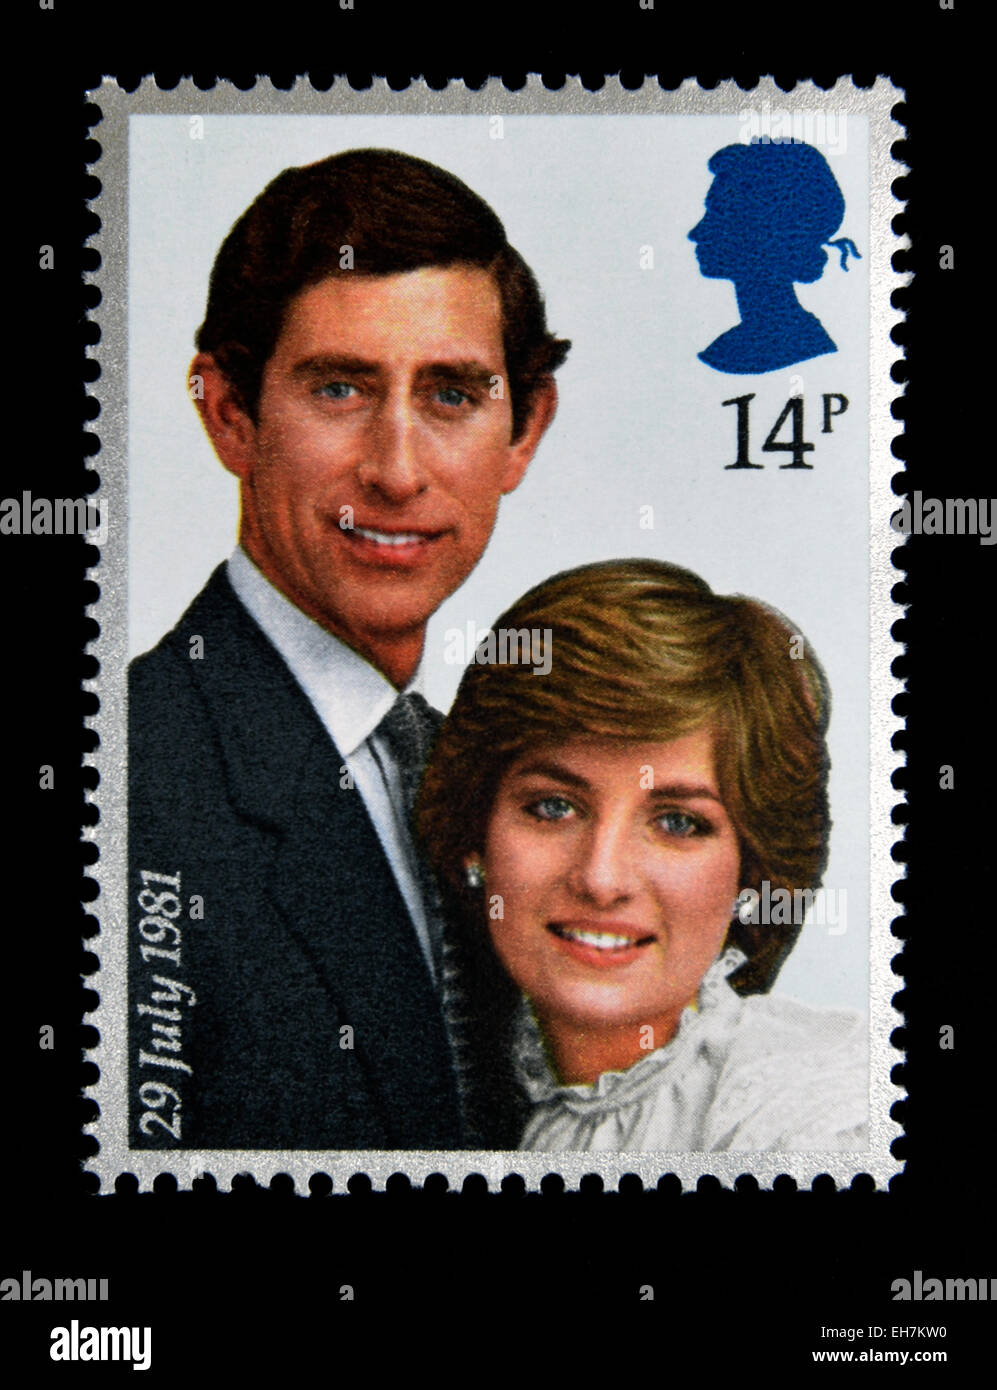 Postage stamp. Great Britain. Queen Elizabeth II. 1981.Royal Wedding, 29th.July 1981. Prince Charles and Lady Diana Spencer. 14p Stock Photo